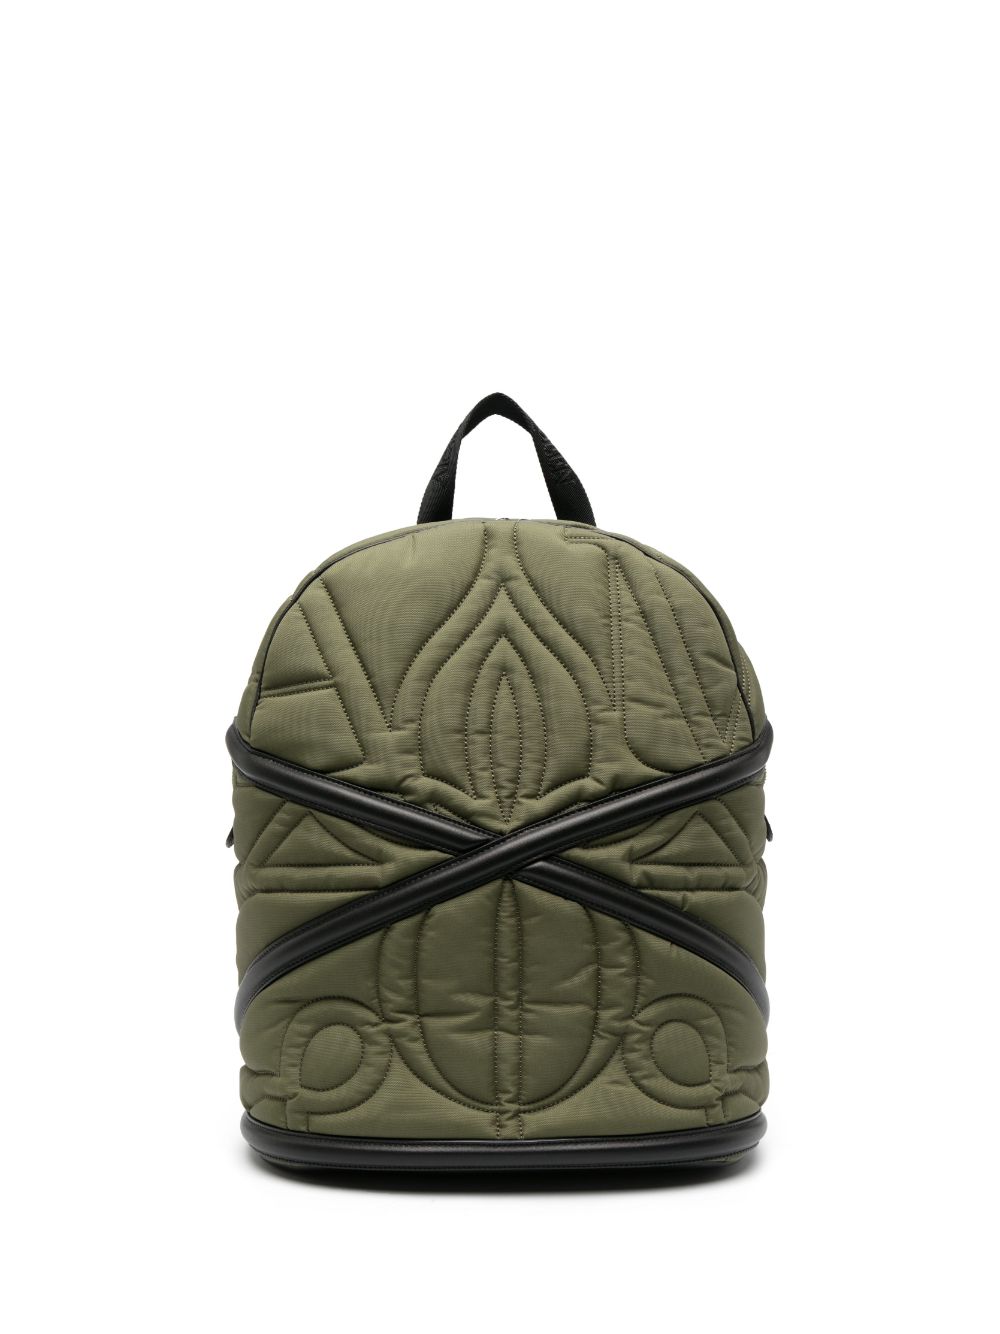 Green Pansies quilted backpack